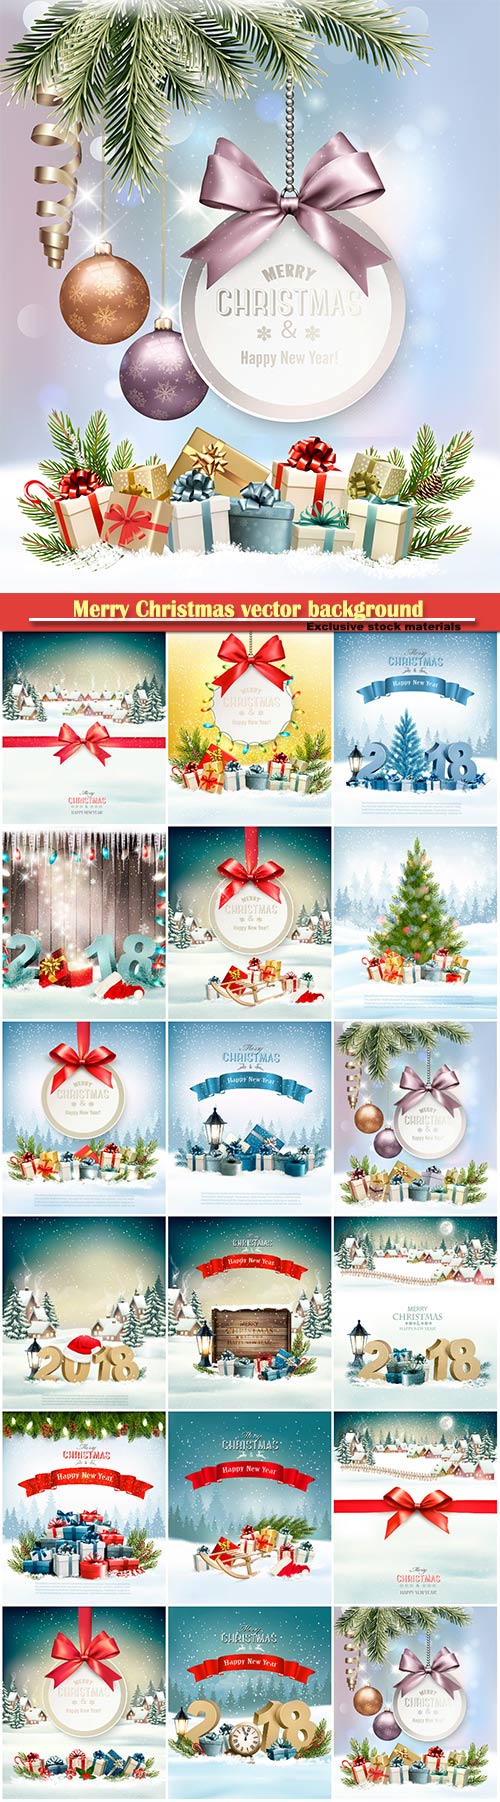 Merry Christmas vector background with branches of tree and colorful gift b ...